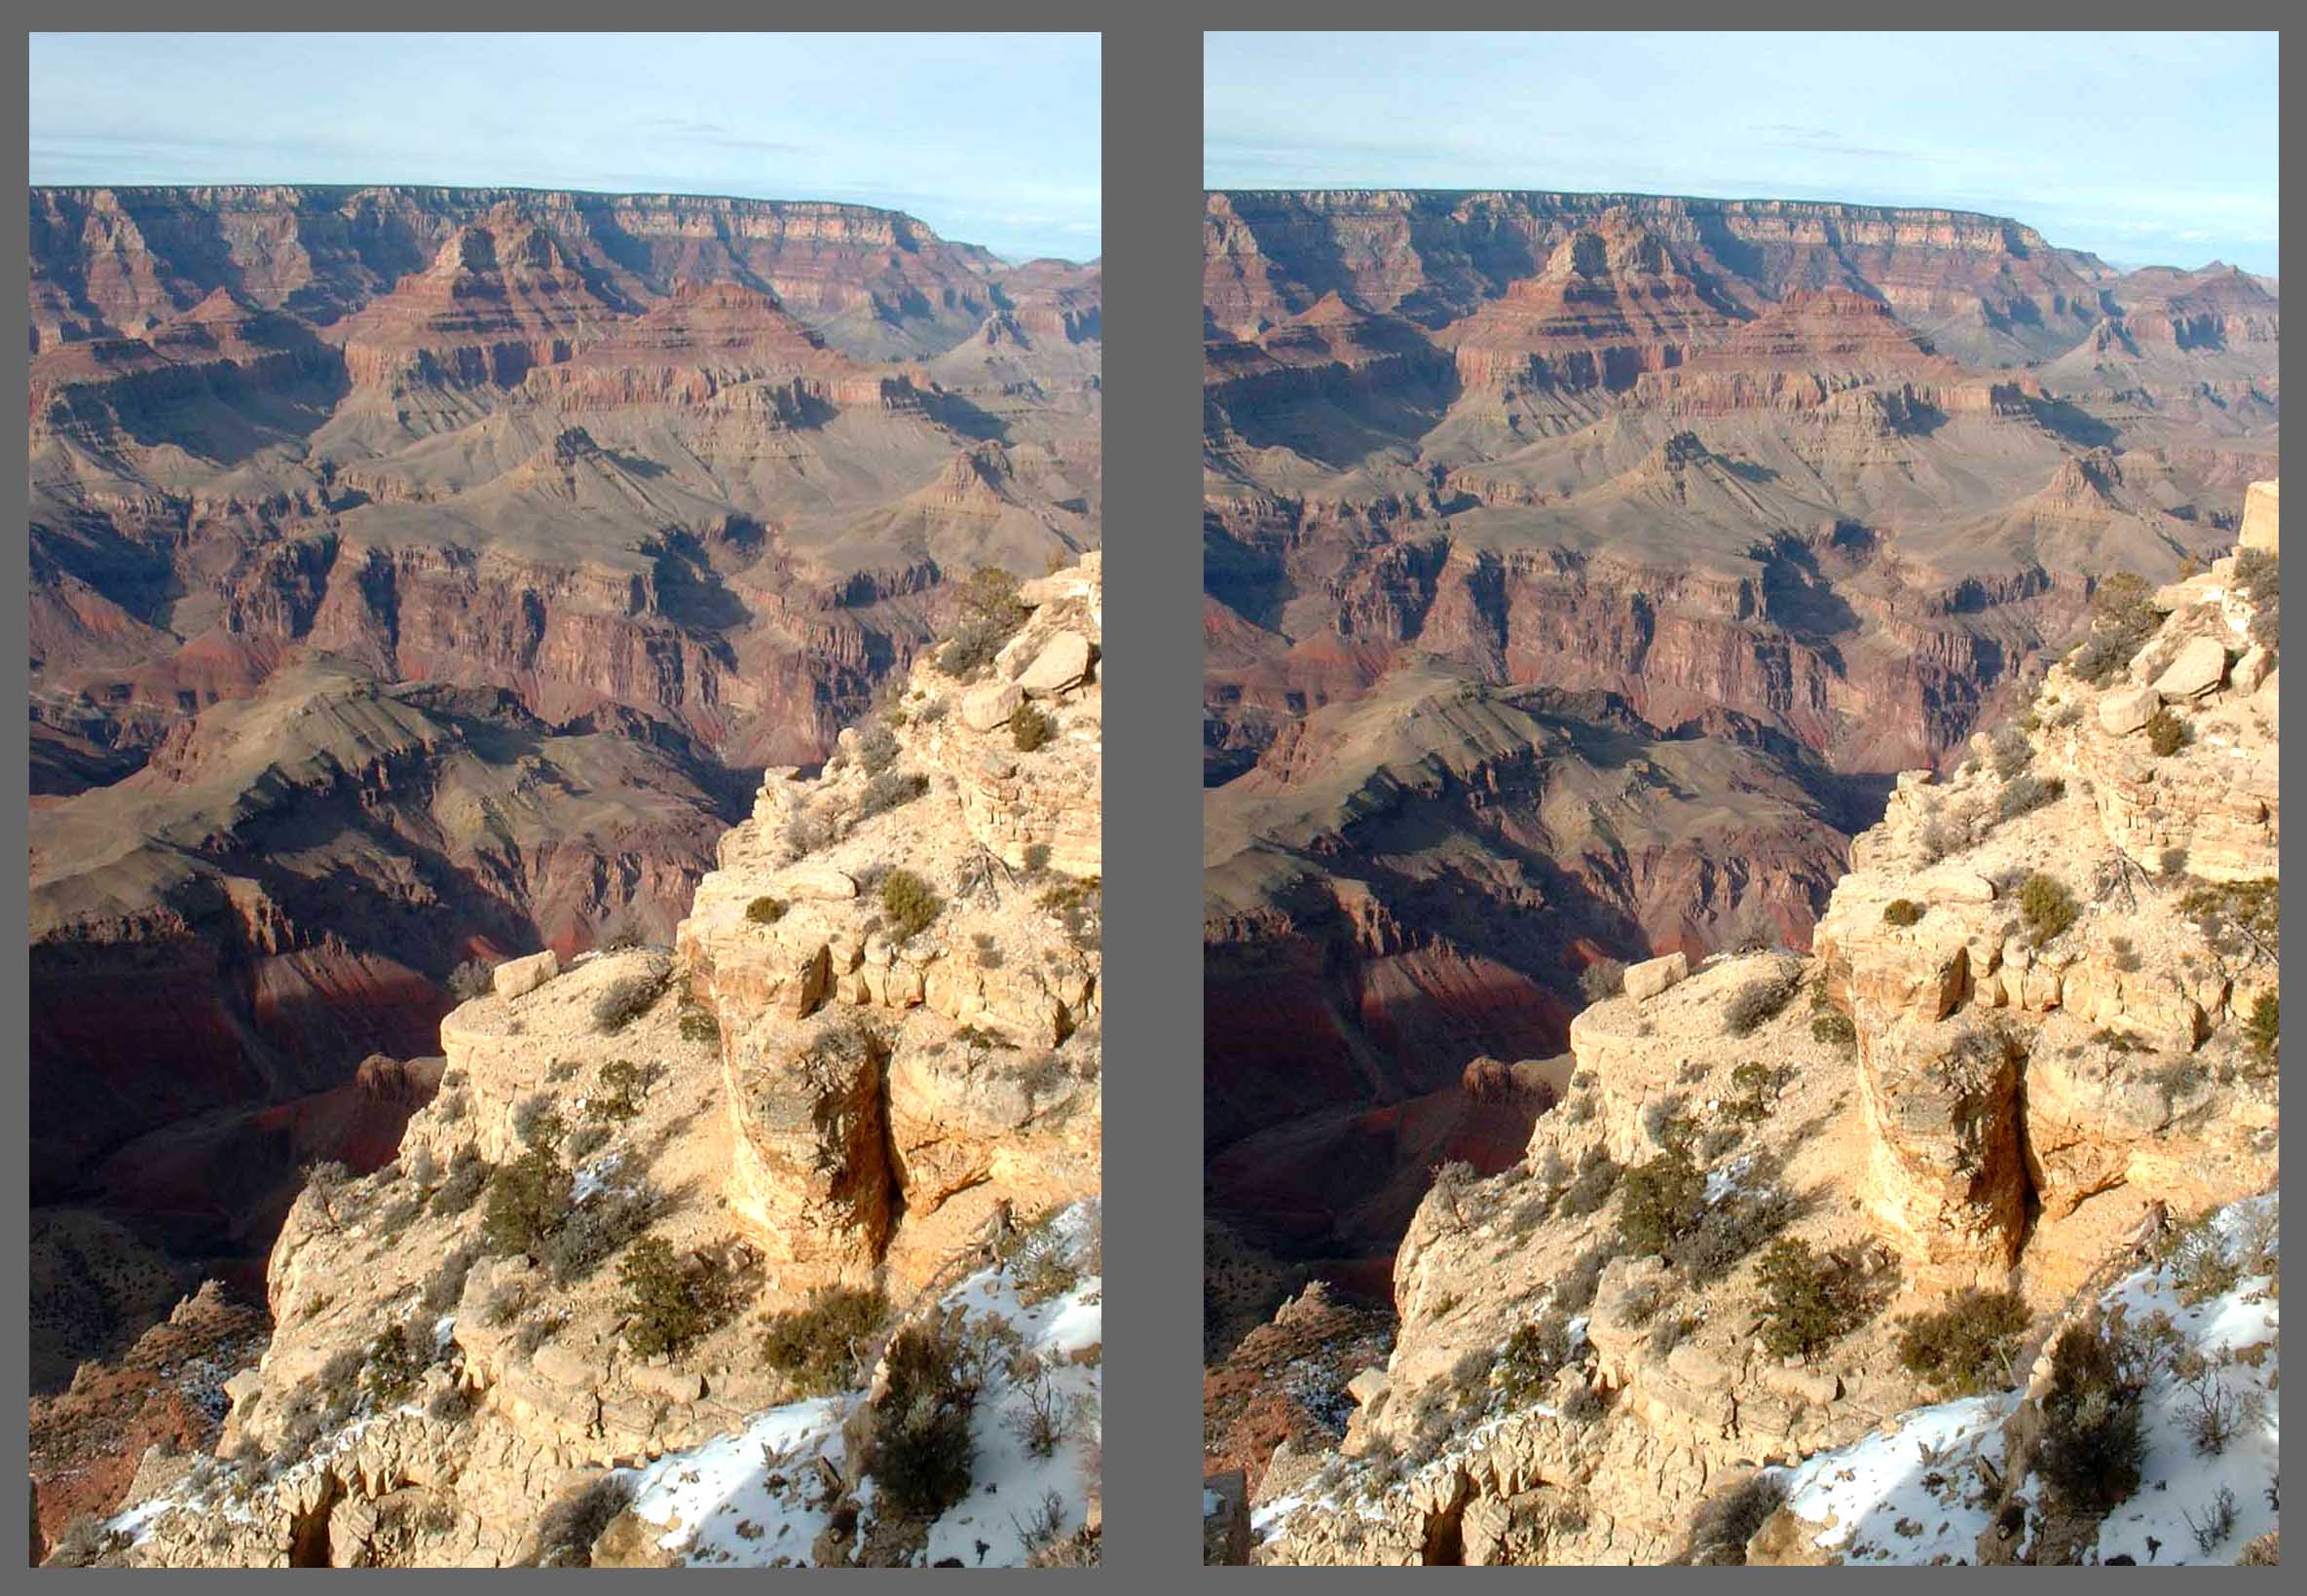 Stereo Photo - Grand Canyon View D - Cross-eyed viewing method